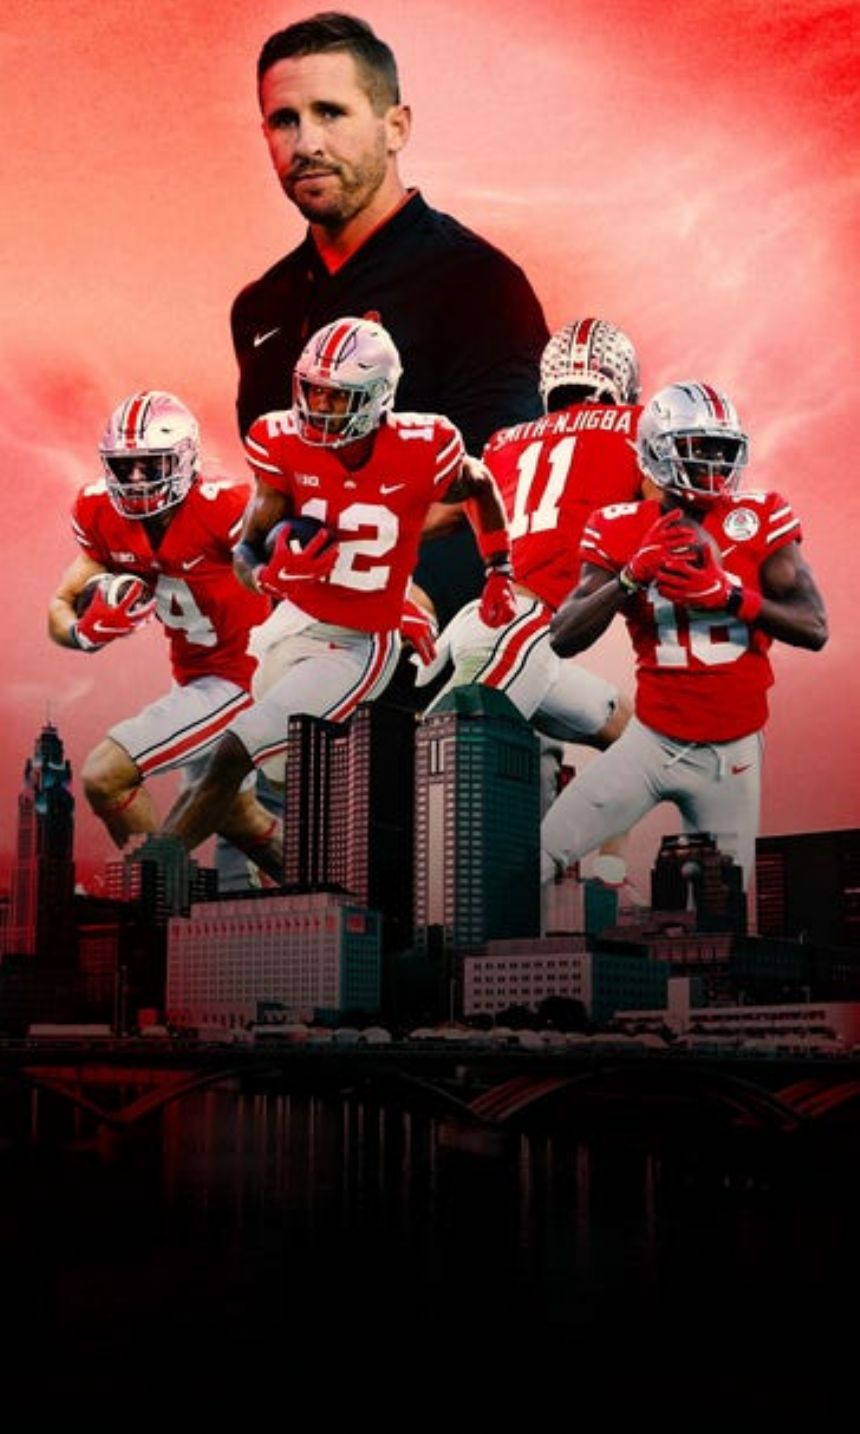 Ohio State, with top recruits and draft picks, becoming wide receiver factory